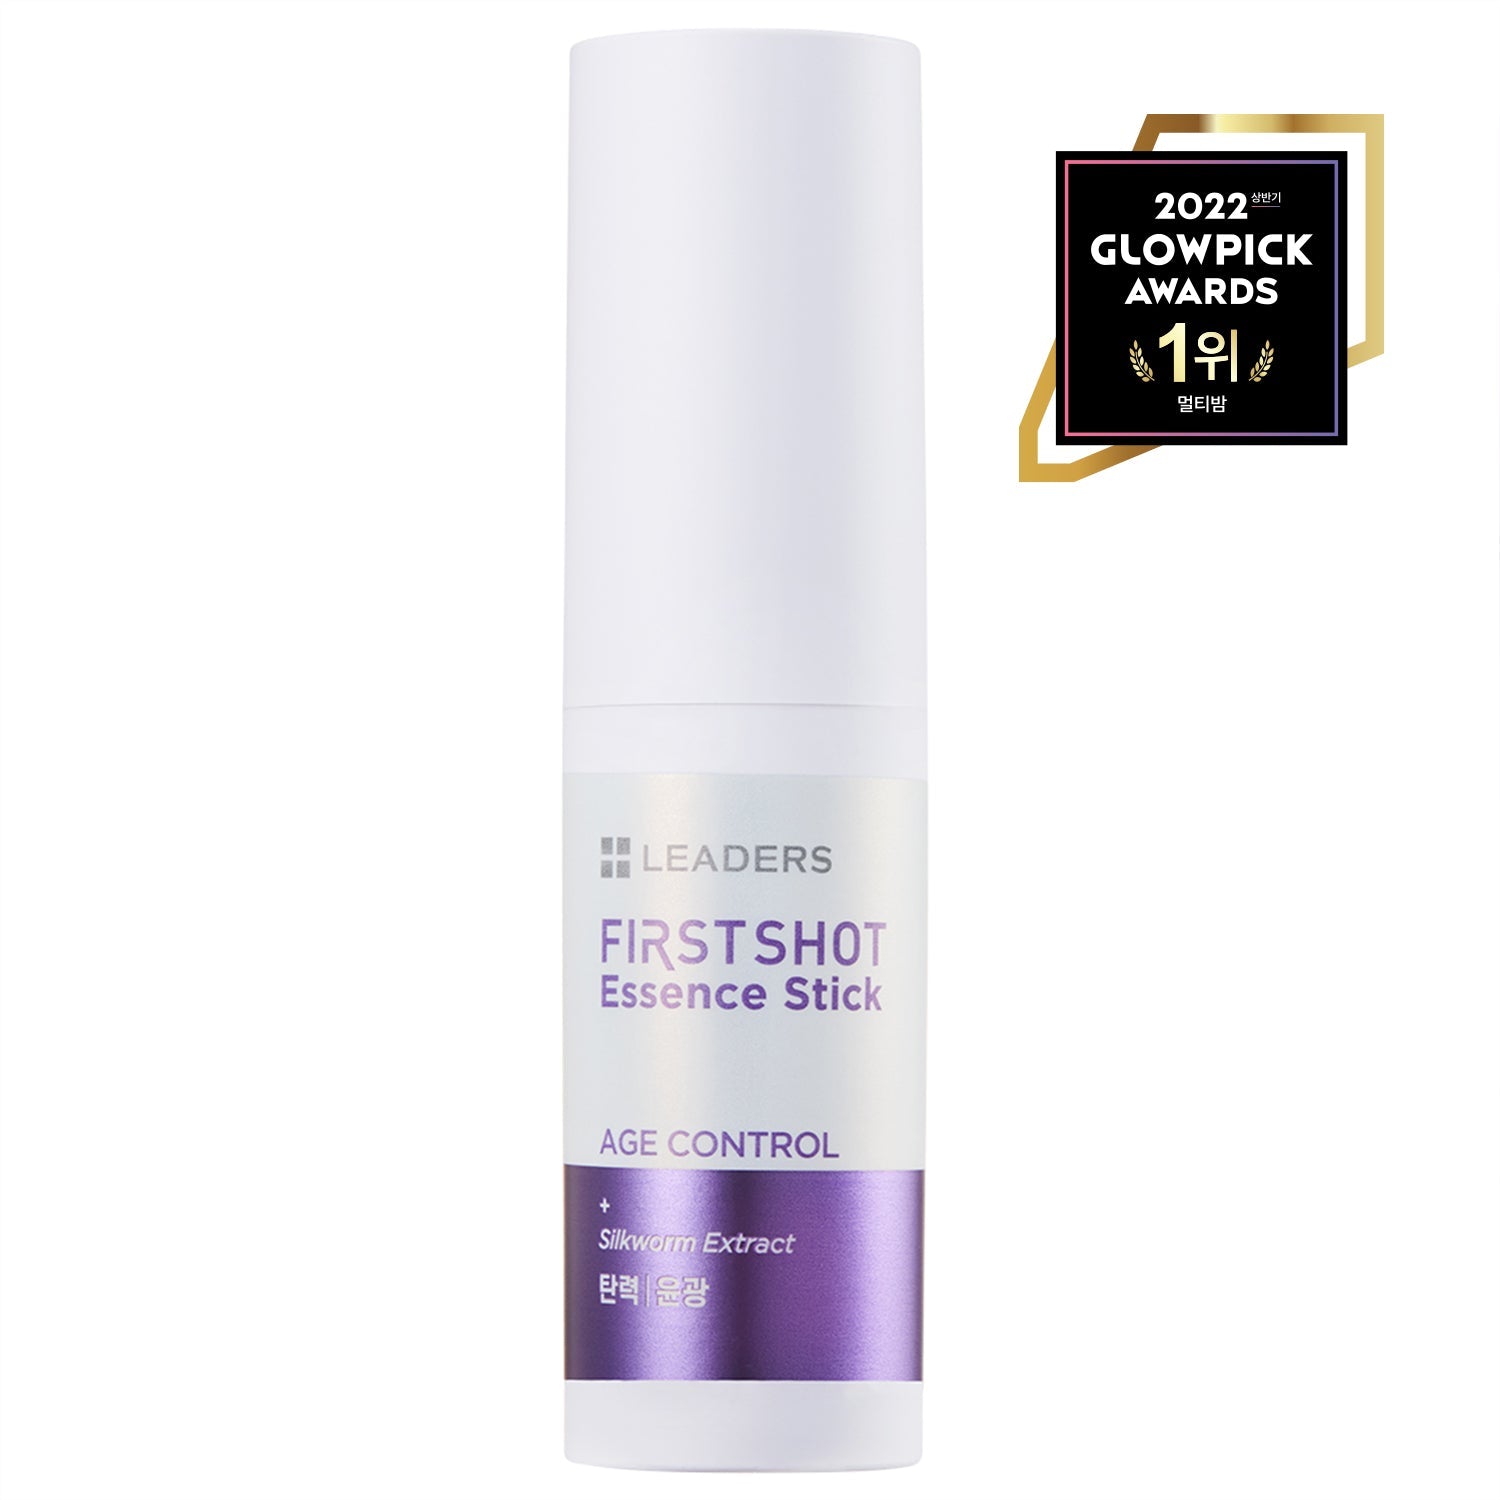 First Shot Essence Stick Age Control | Leaders